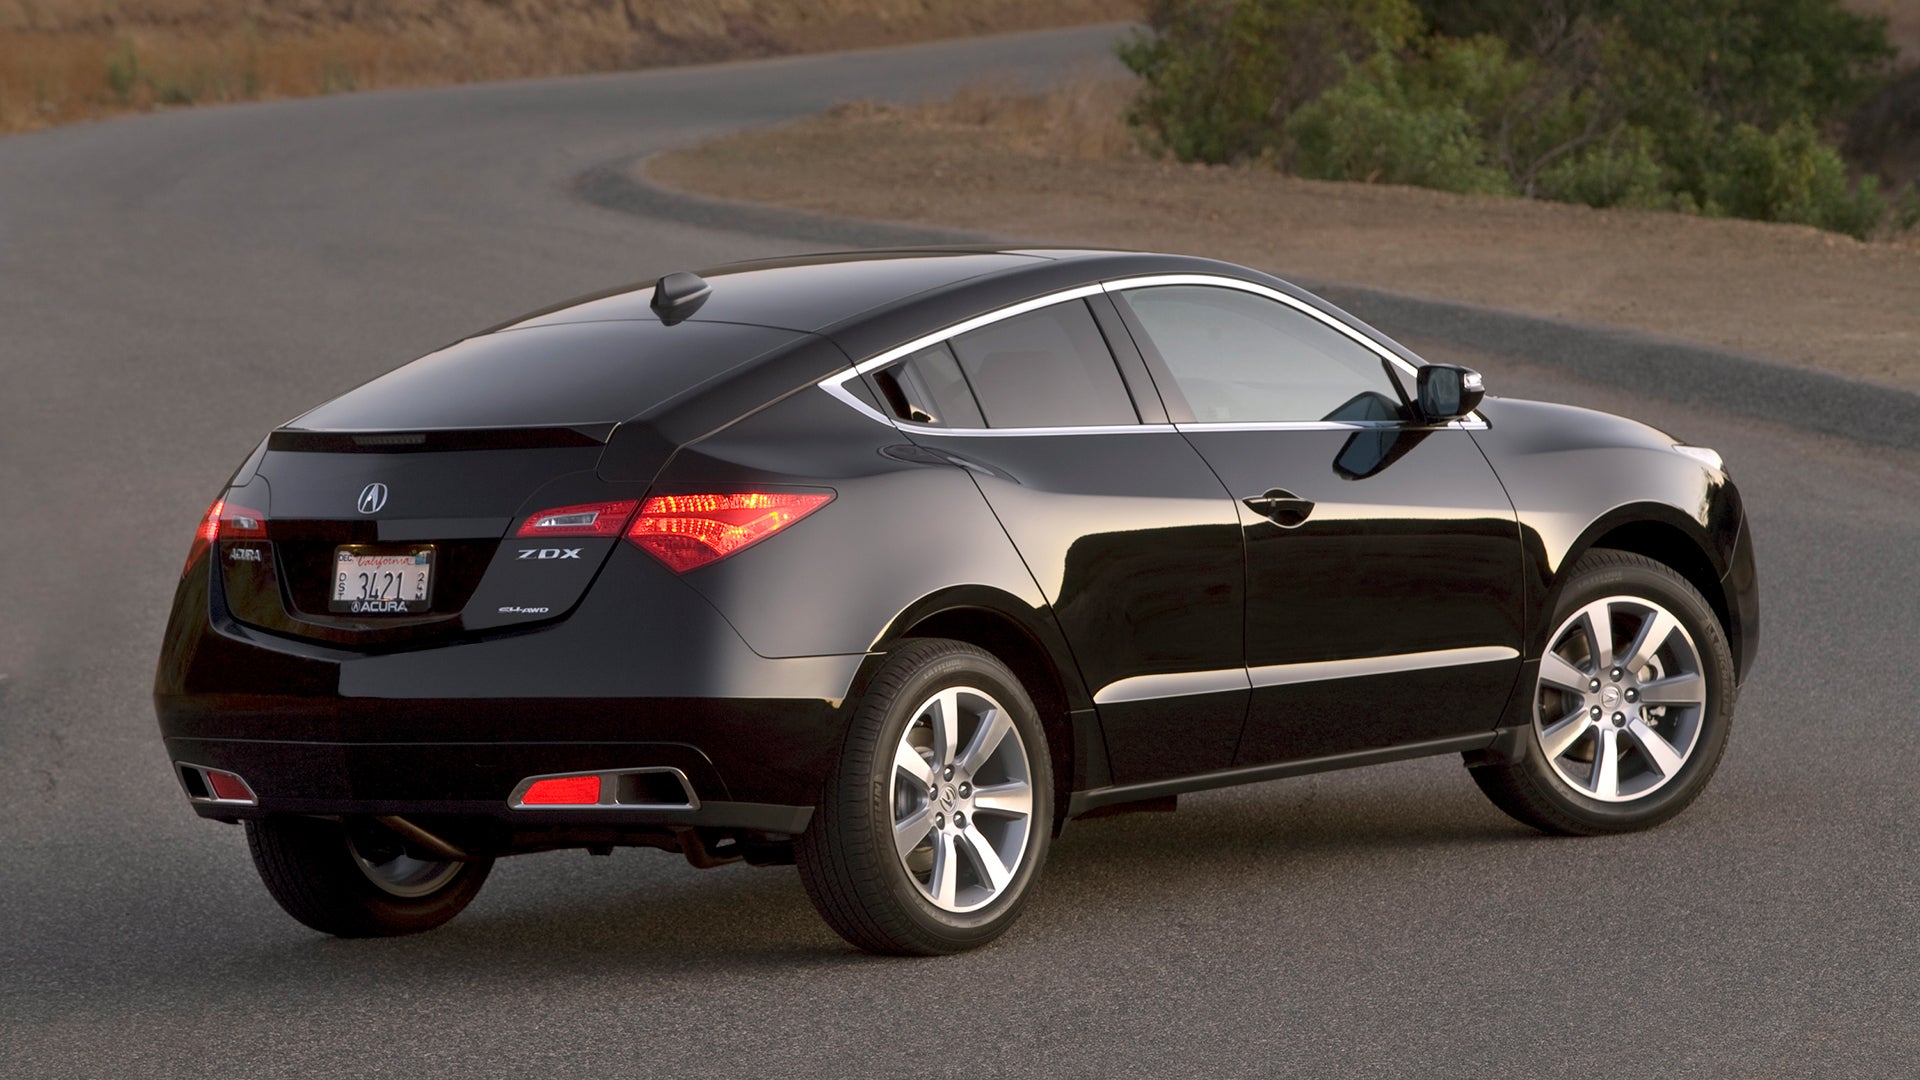 2010-2013 Acura ZDX Explained: Why It's an Odd Underappreciated SUV